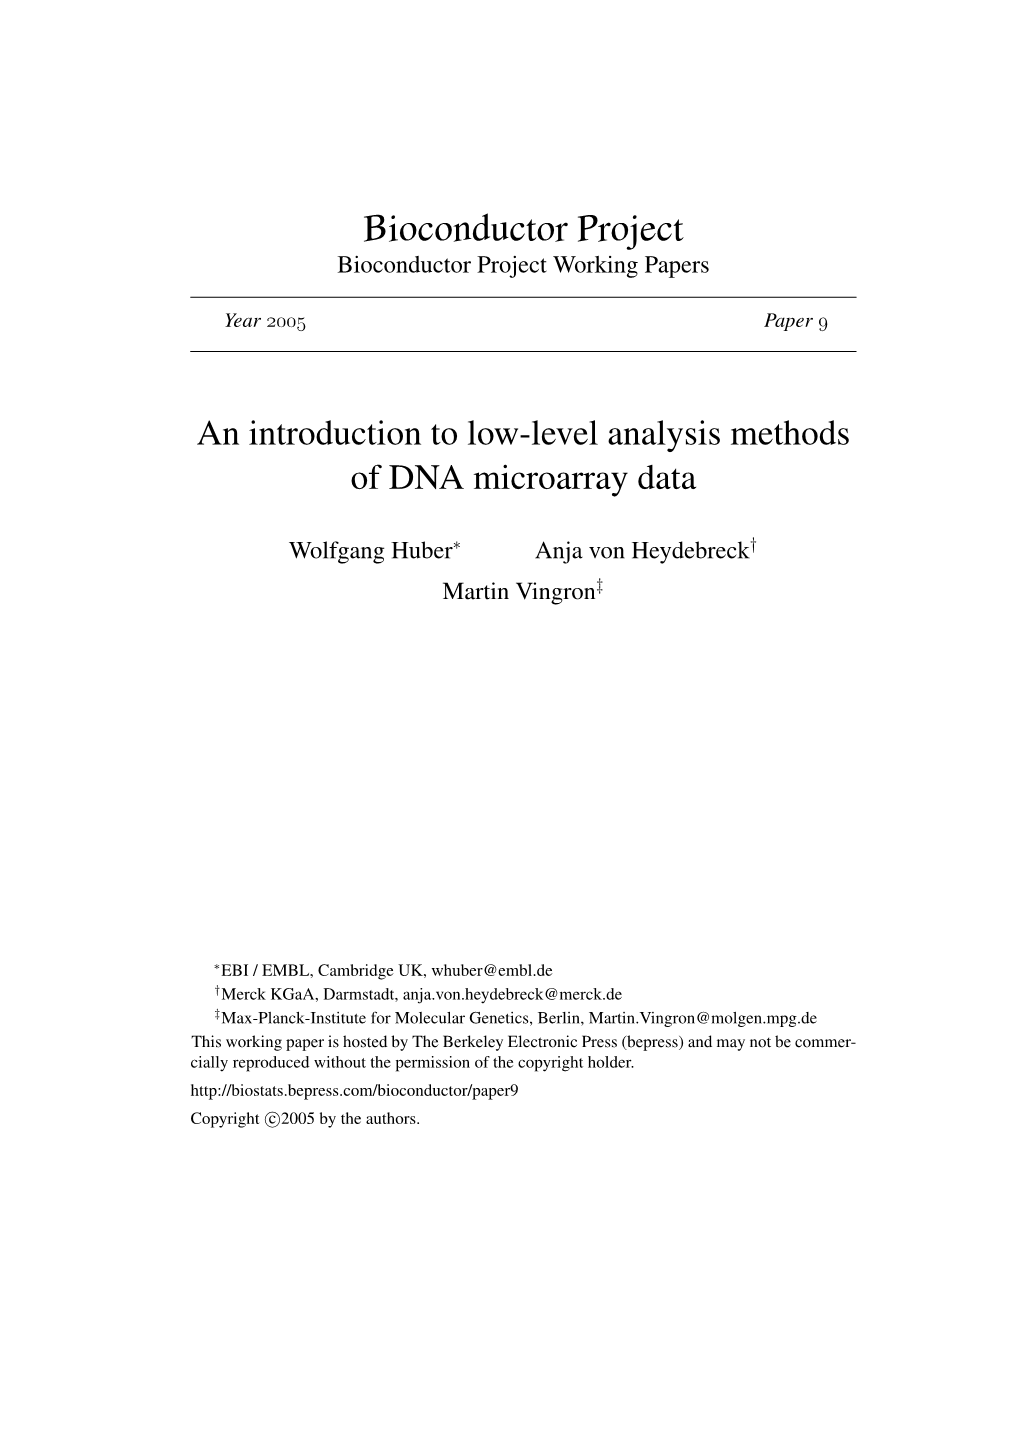 An Introduction to Low-Level Analysis Methods of DNA Microarray Data